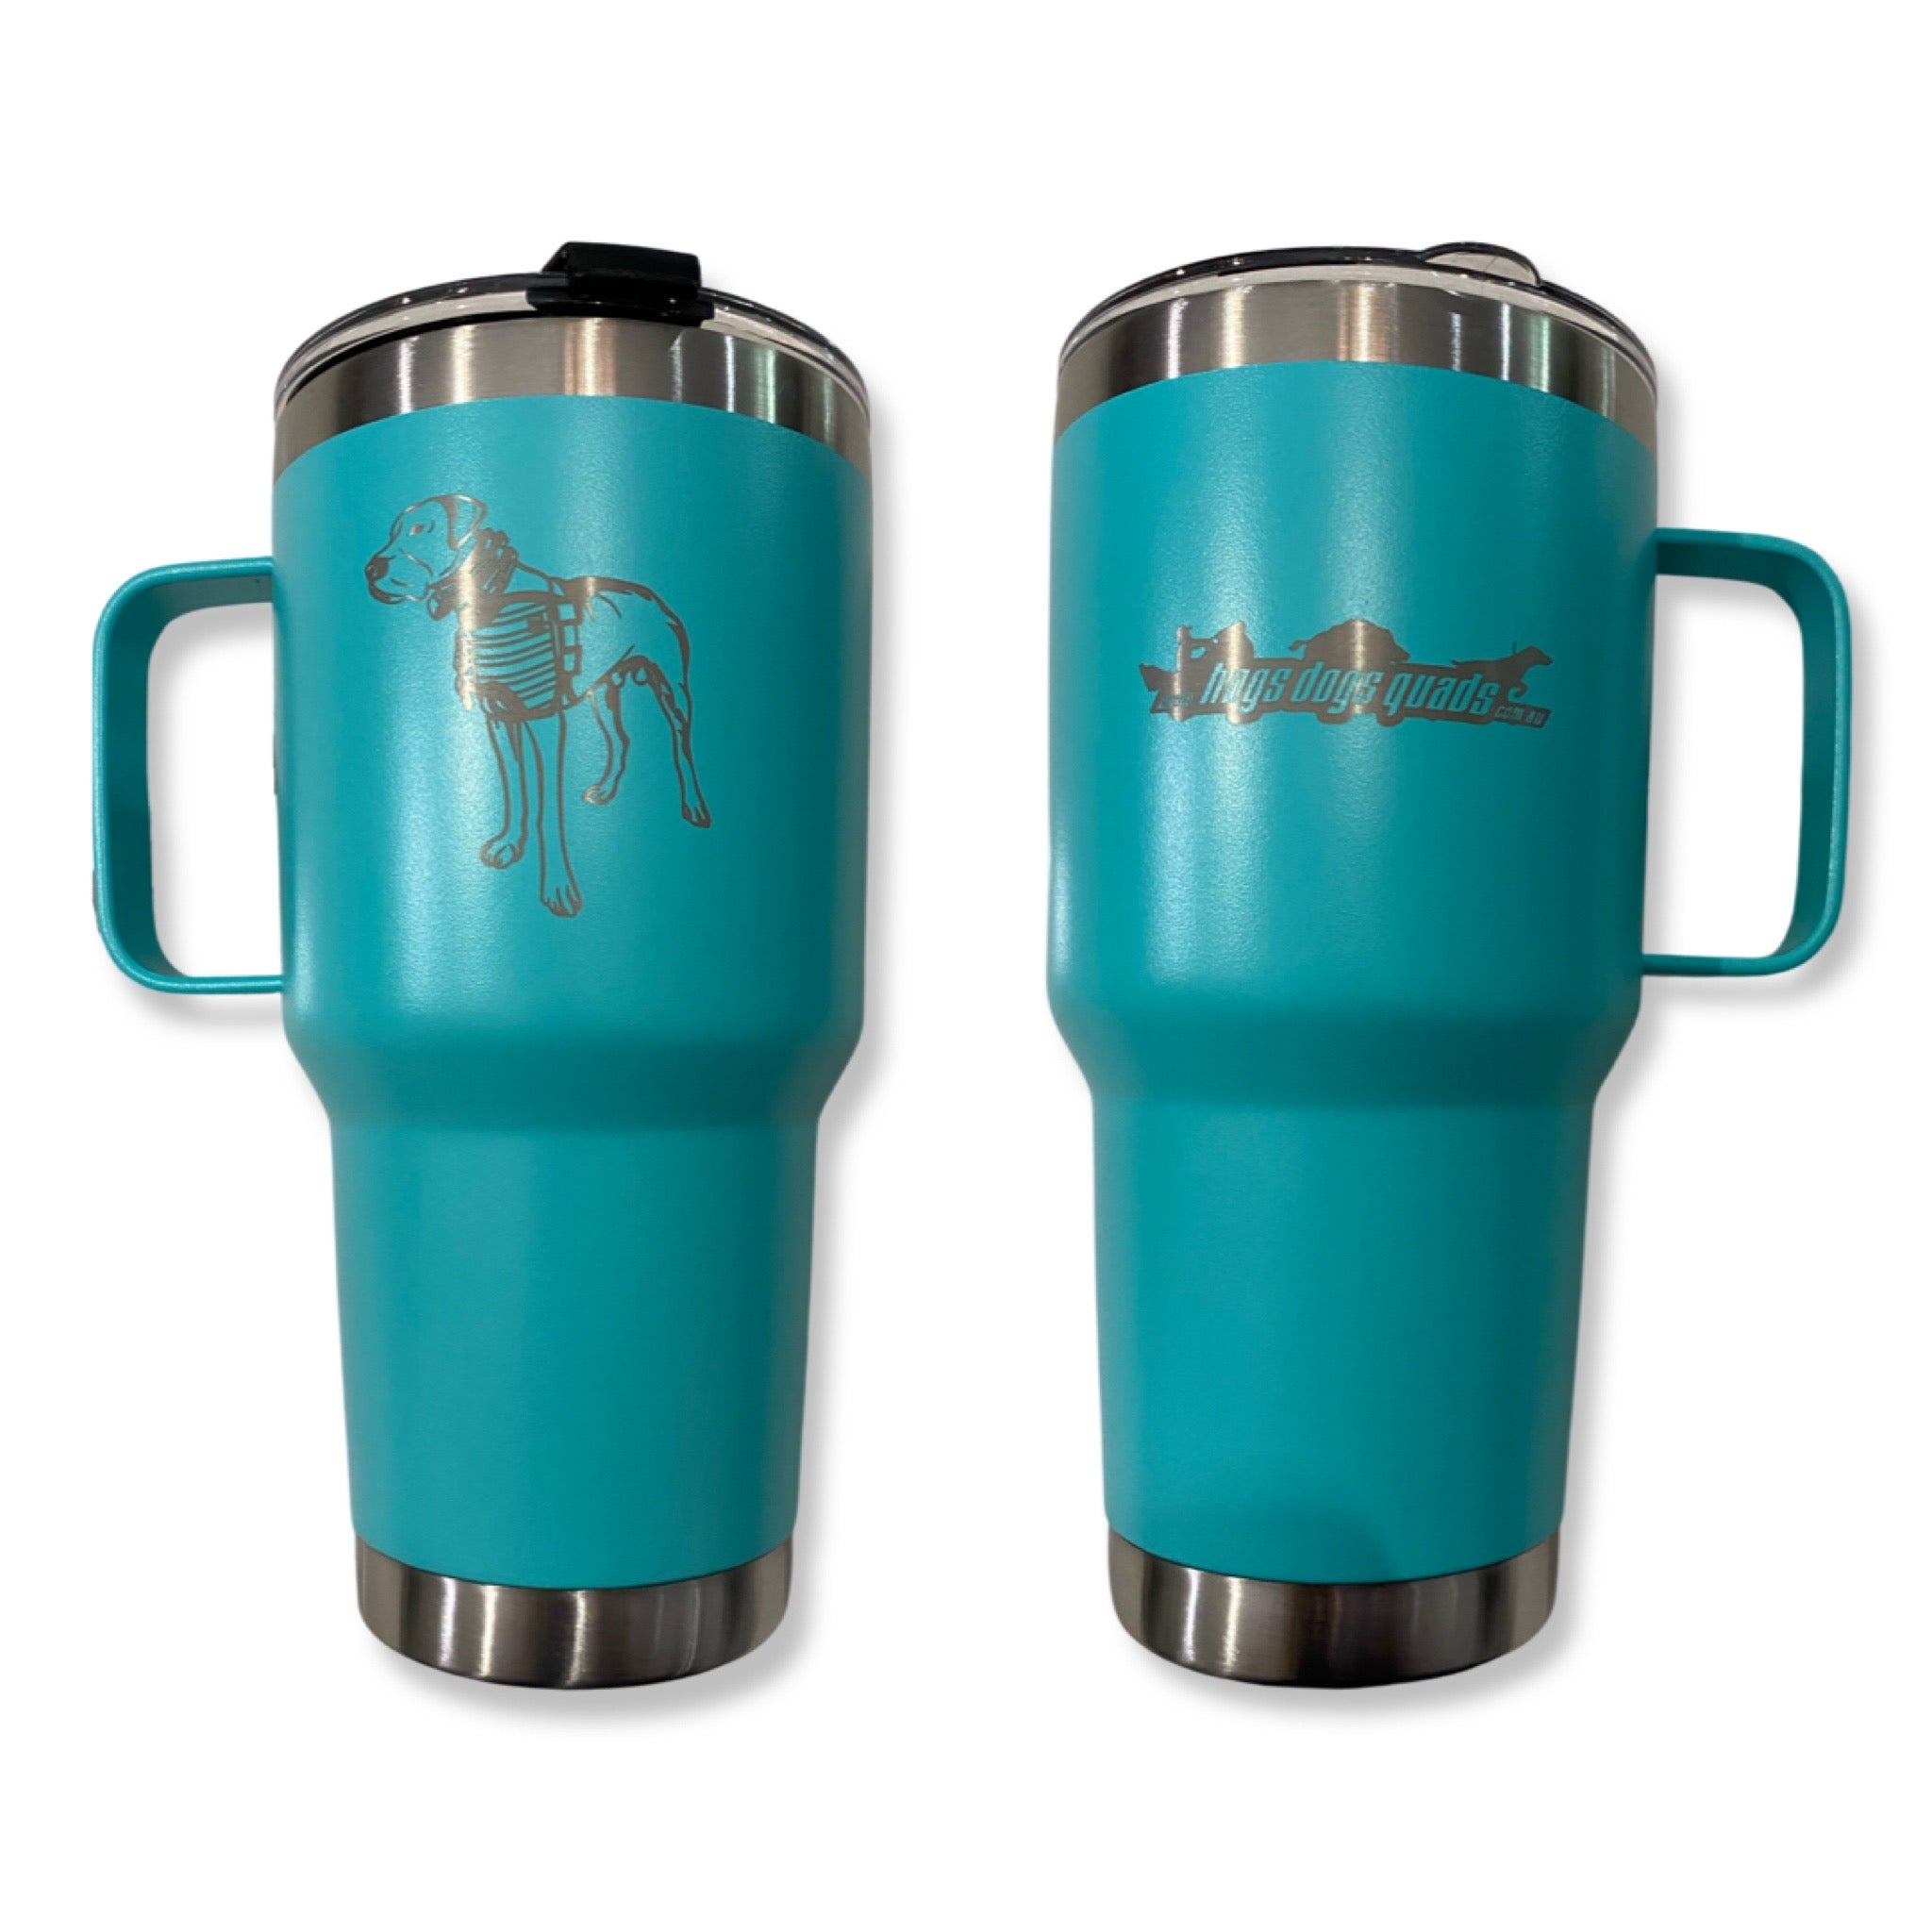 HDQ Travel Mug with lid - TEAL - Hogs Dogs Quads Shop